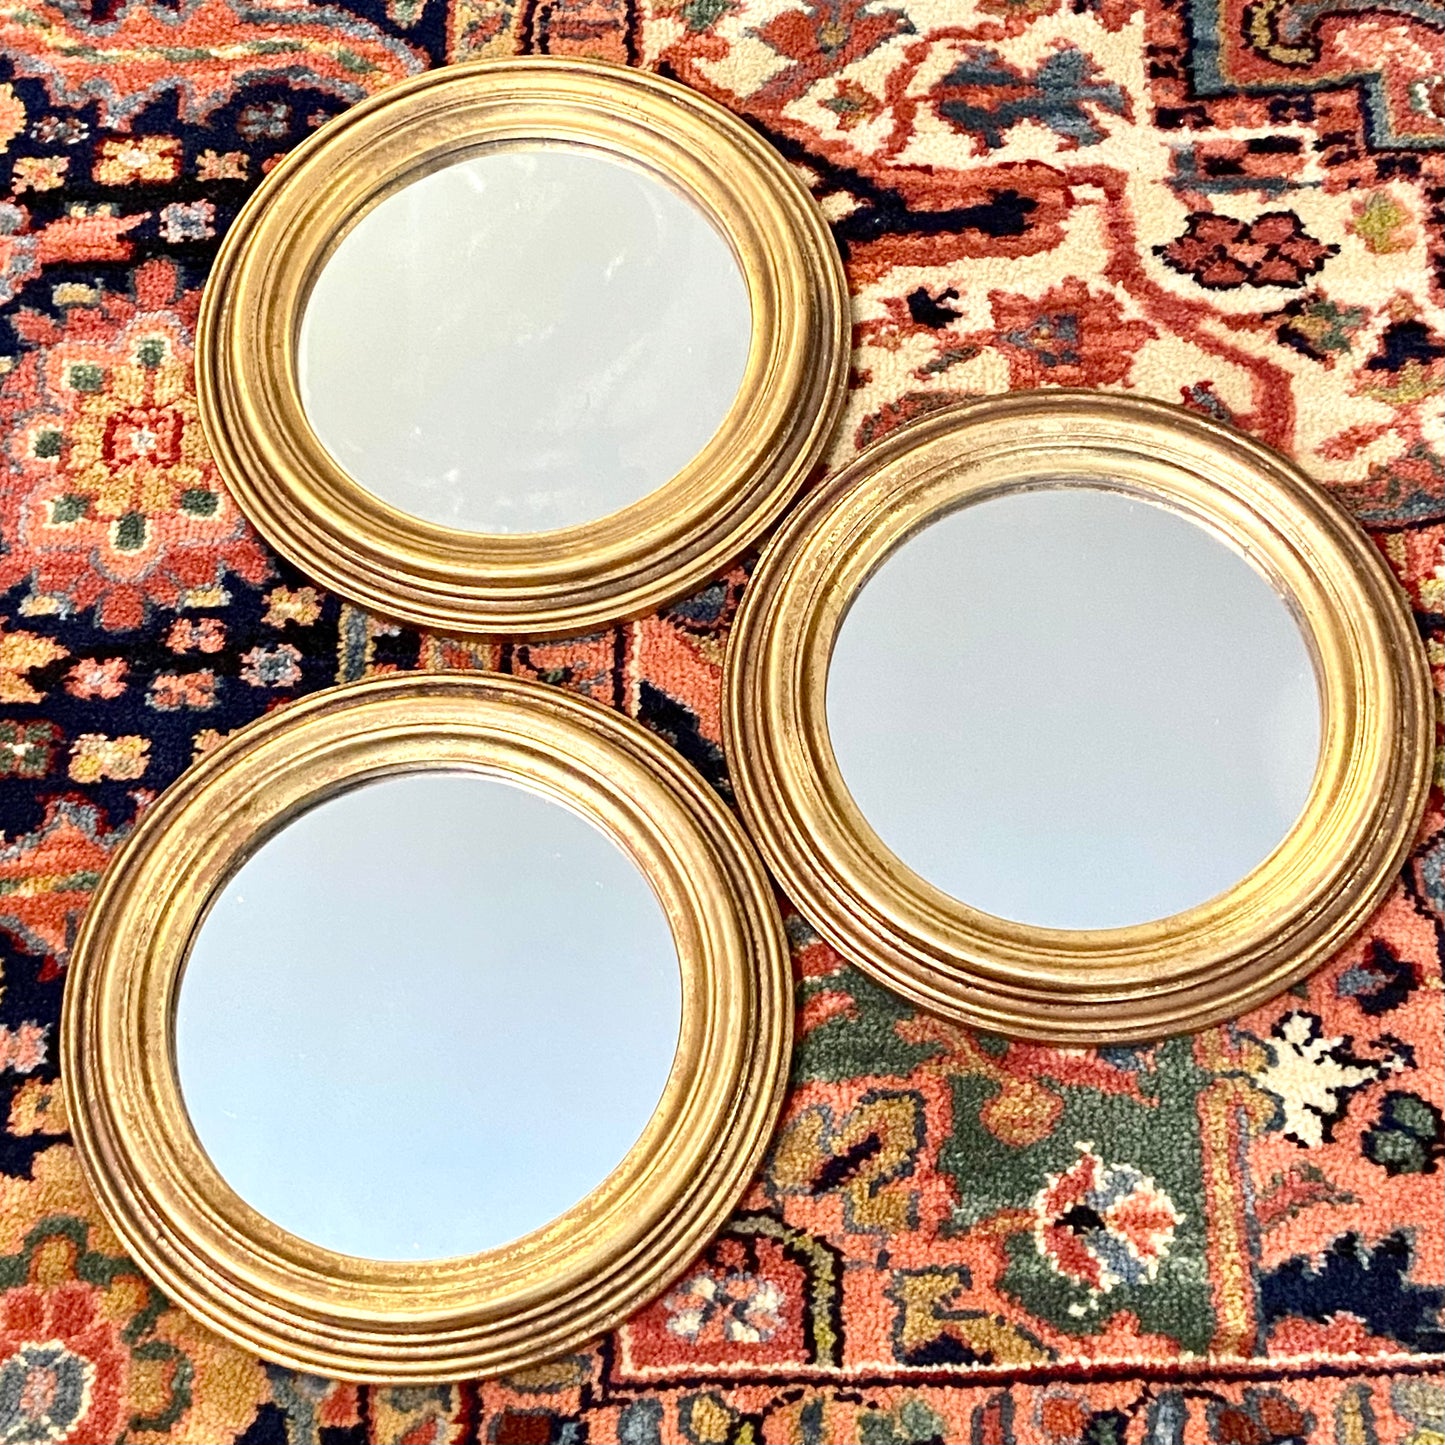 Vintage round gold gilt mirrors for wall or display